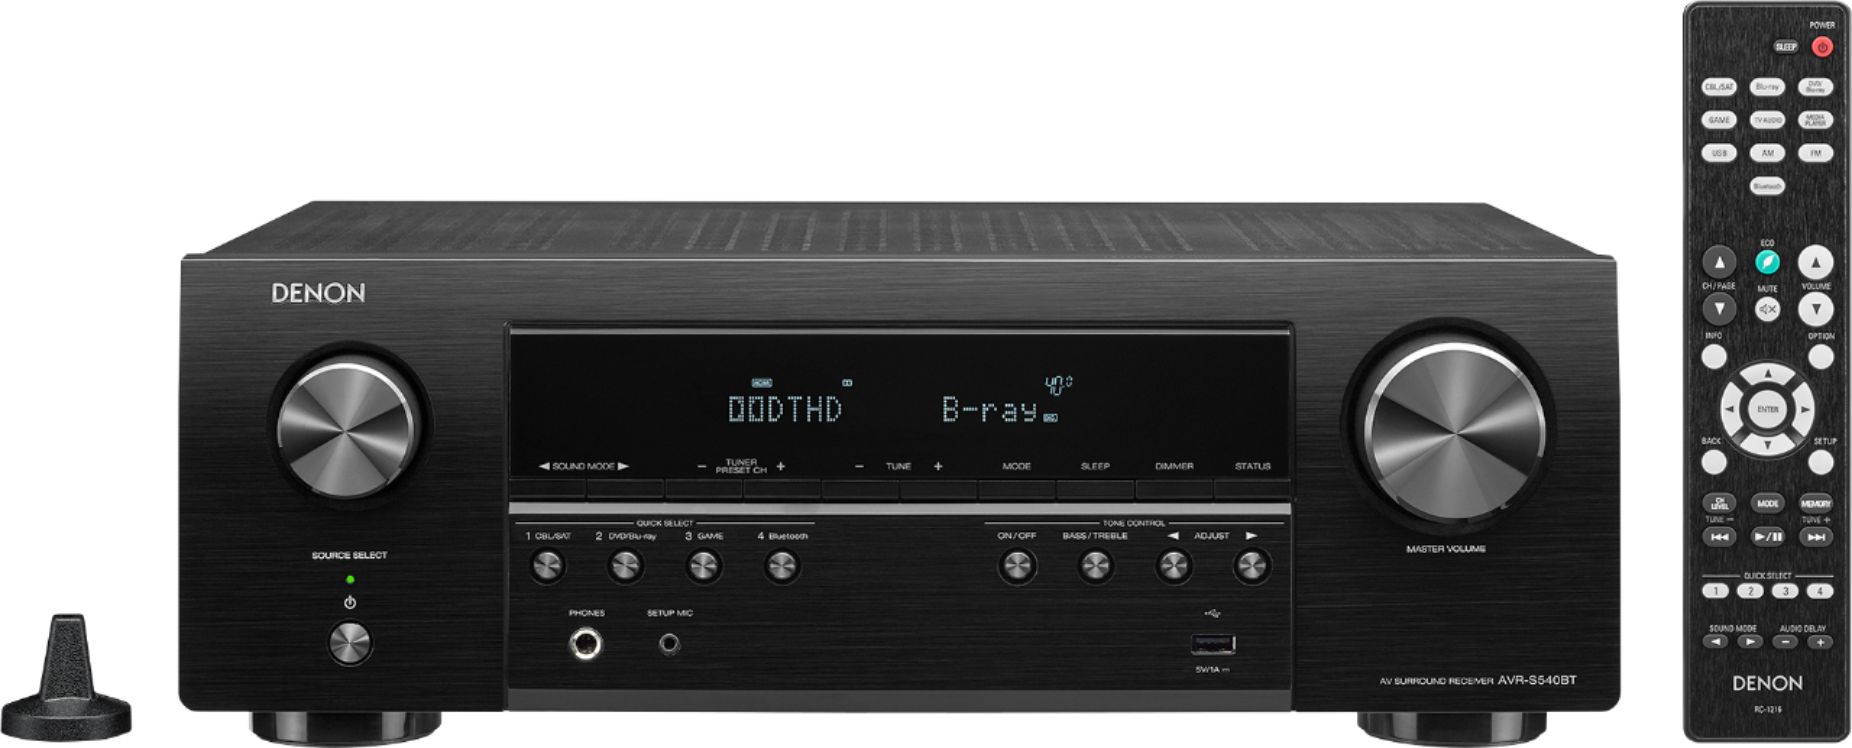 stil Kolibrie vijver Denon AVR-S540BT Receiver, 5.2 channel, 4K Ultra HD Audio and Video, Home  Theater System, built-in Bluetooth and USB Black AVR-S540BT - Best Buy